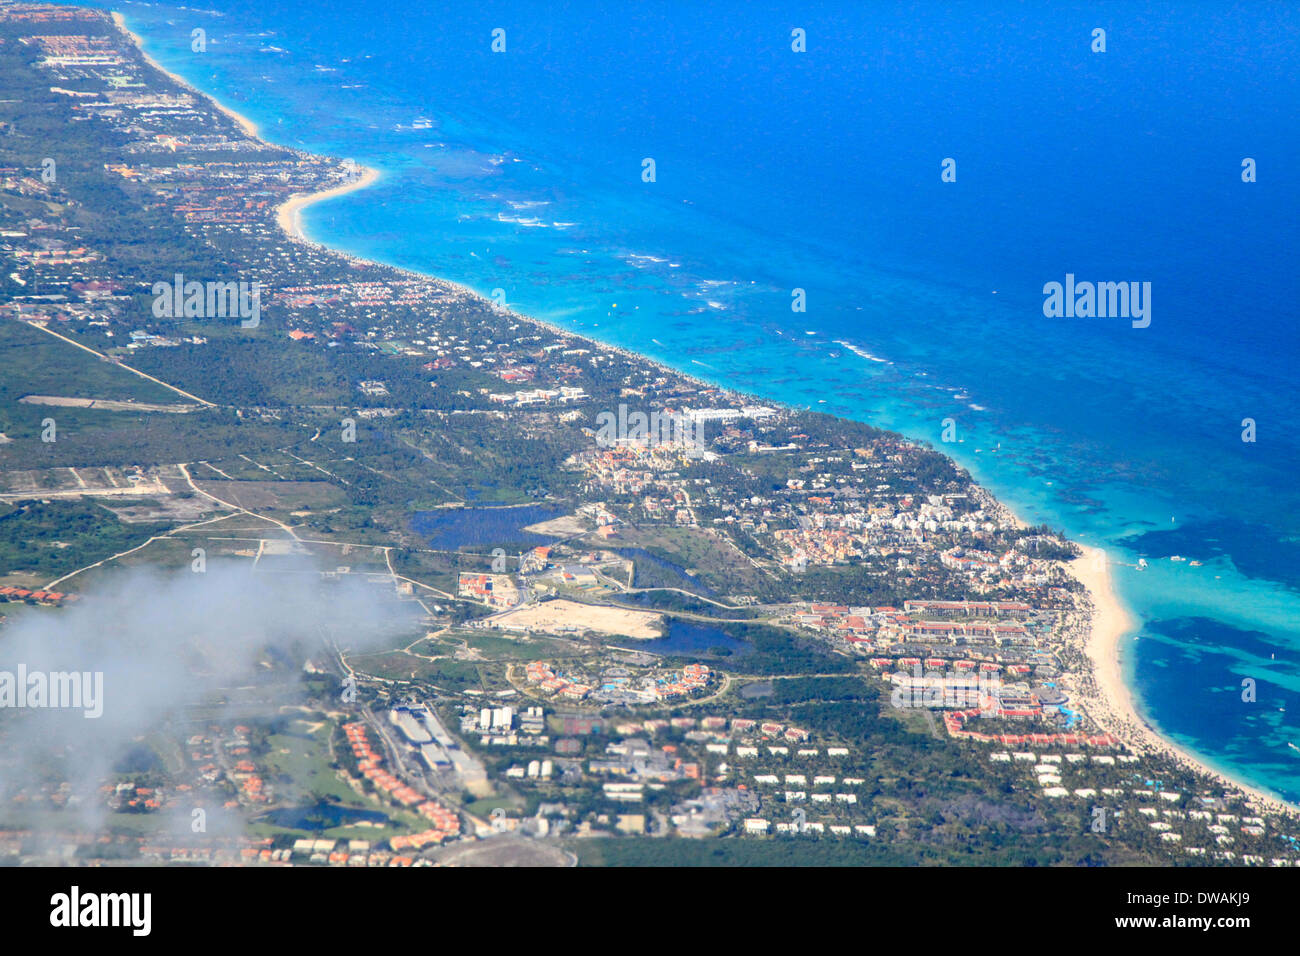 Punta Cana, Dominican Republic, aerial view Stock Photo